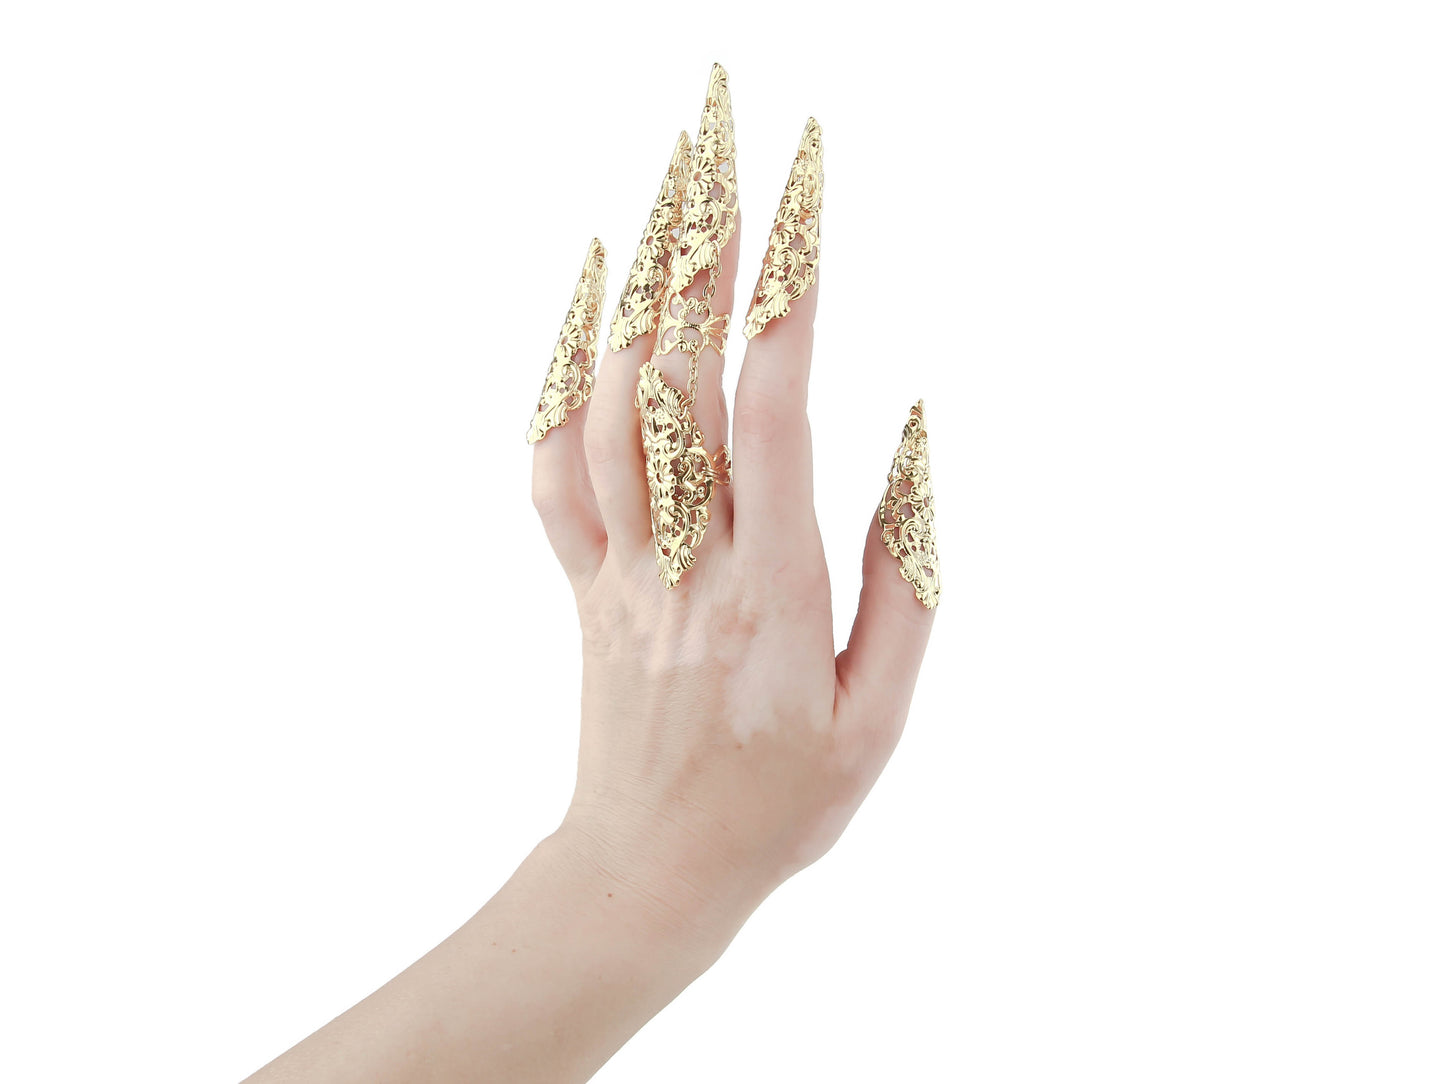 A hand is adorned with Myril Jewels' striking full-finger gold claw ring on the middle finger and gold metal claws on the other four, all crafted with intricate filigree. This bold piece is a testament to the neo-goth jewelry aesthetic, perfect for those who favor a dark-avantgarde, gothic-chic look. Ideal for Halloween, punk fashion, and whimsigoth styles, it's also suited for everyday wear or as a dramatic accessory for rave parties and festivals